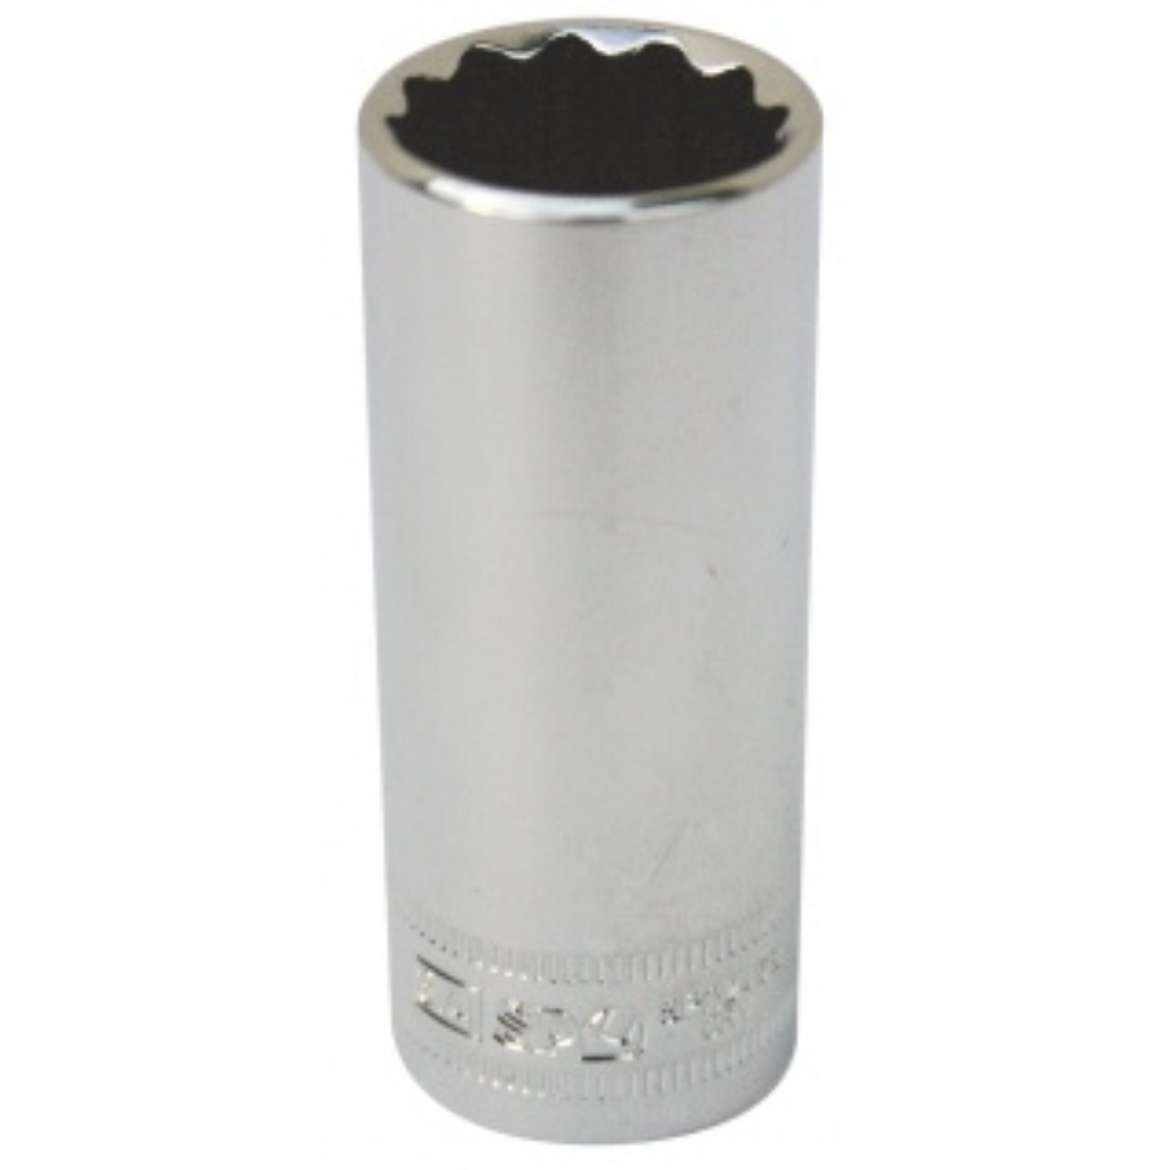 Picture of SOCKET DEEP 1/4"DR 12PT SAE 1/4" SP TOOLS